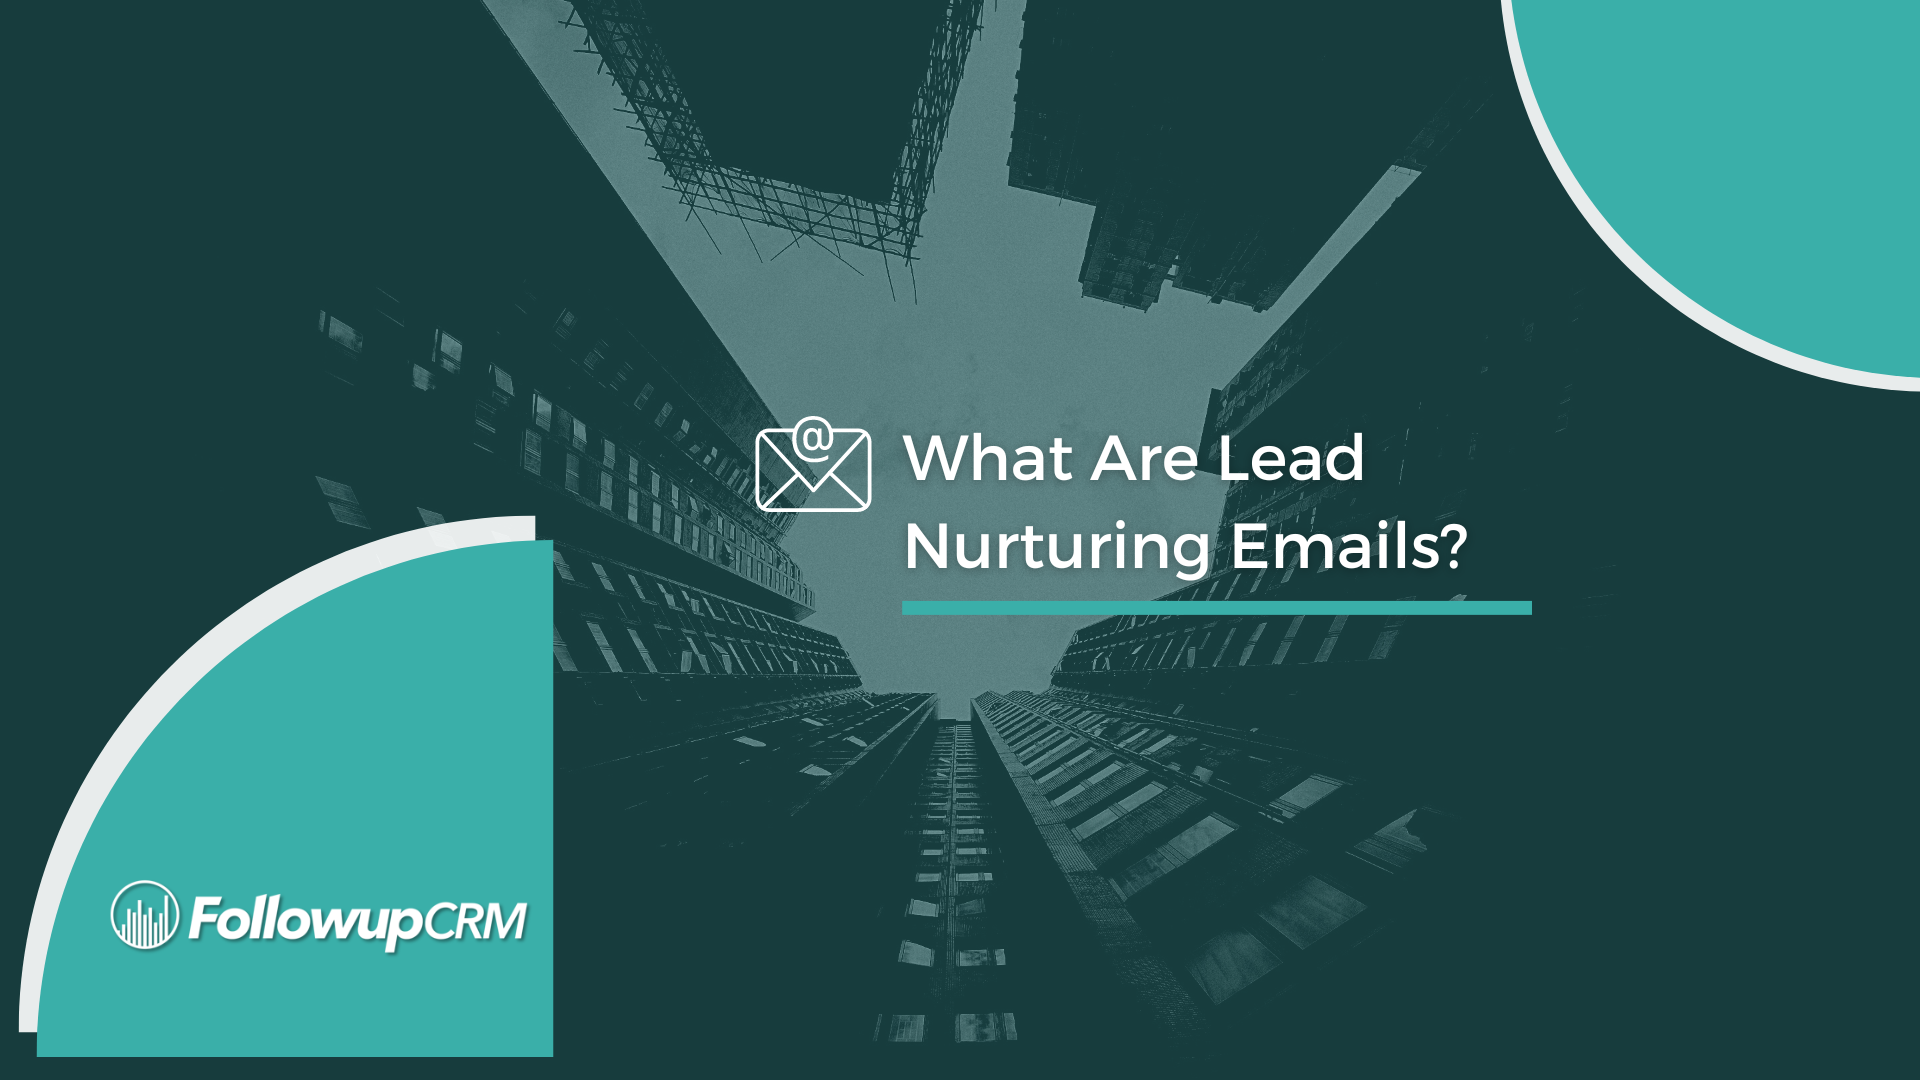 What Are Lead Nurturing Emails?